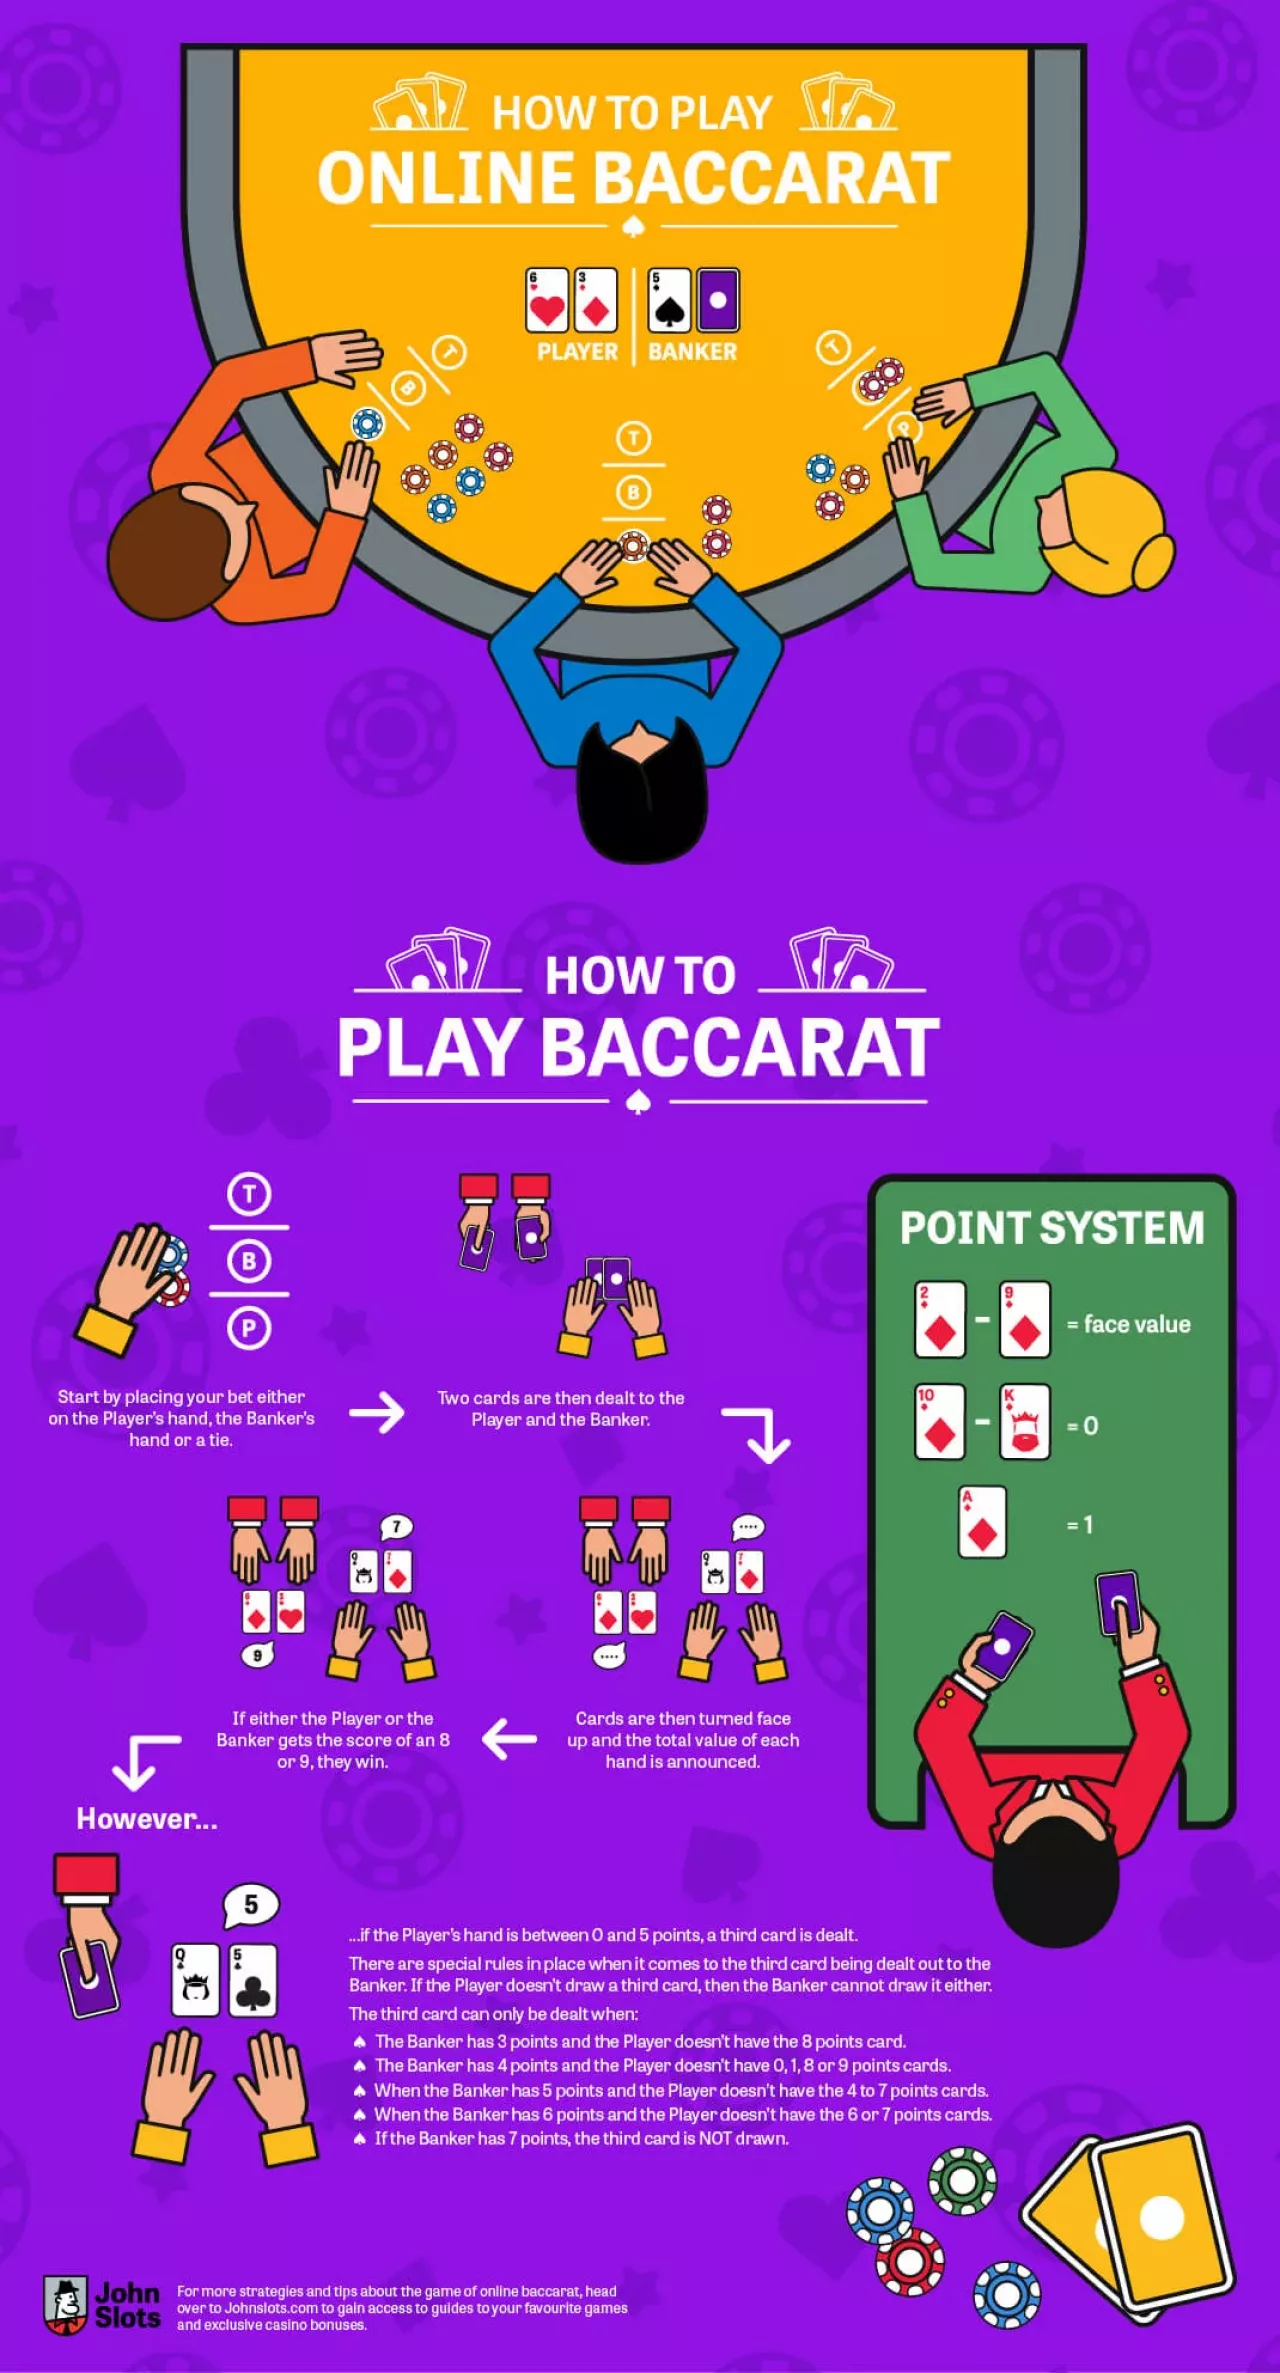 How to play baccarat - Should I bet player, banker or tie?